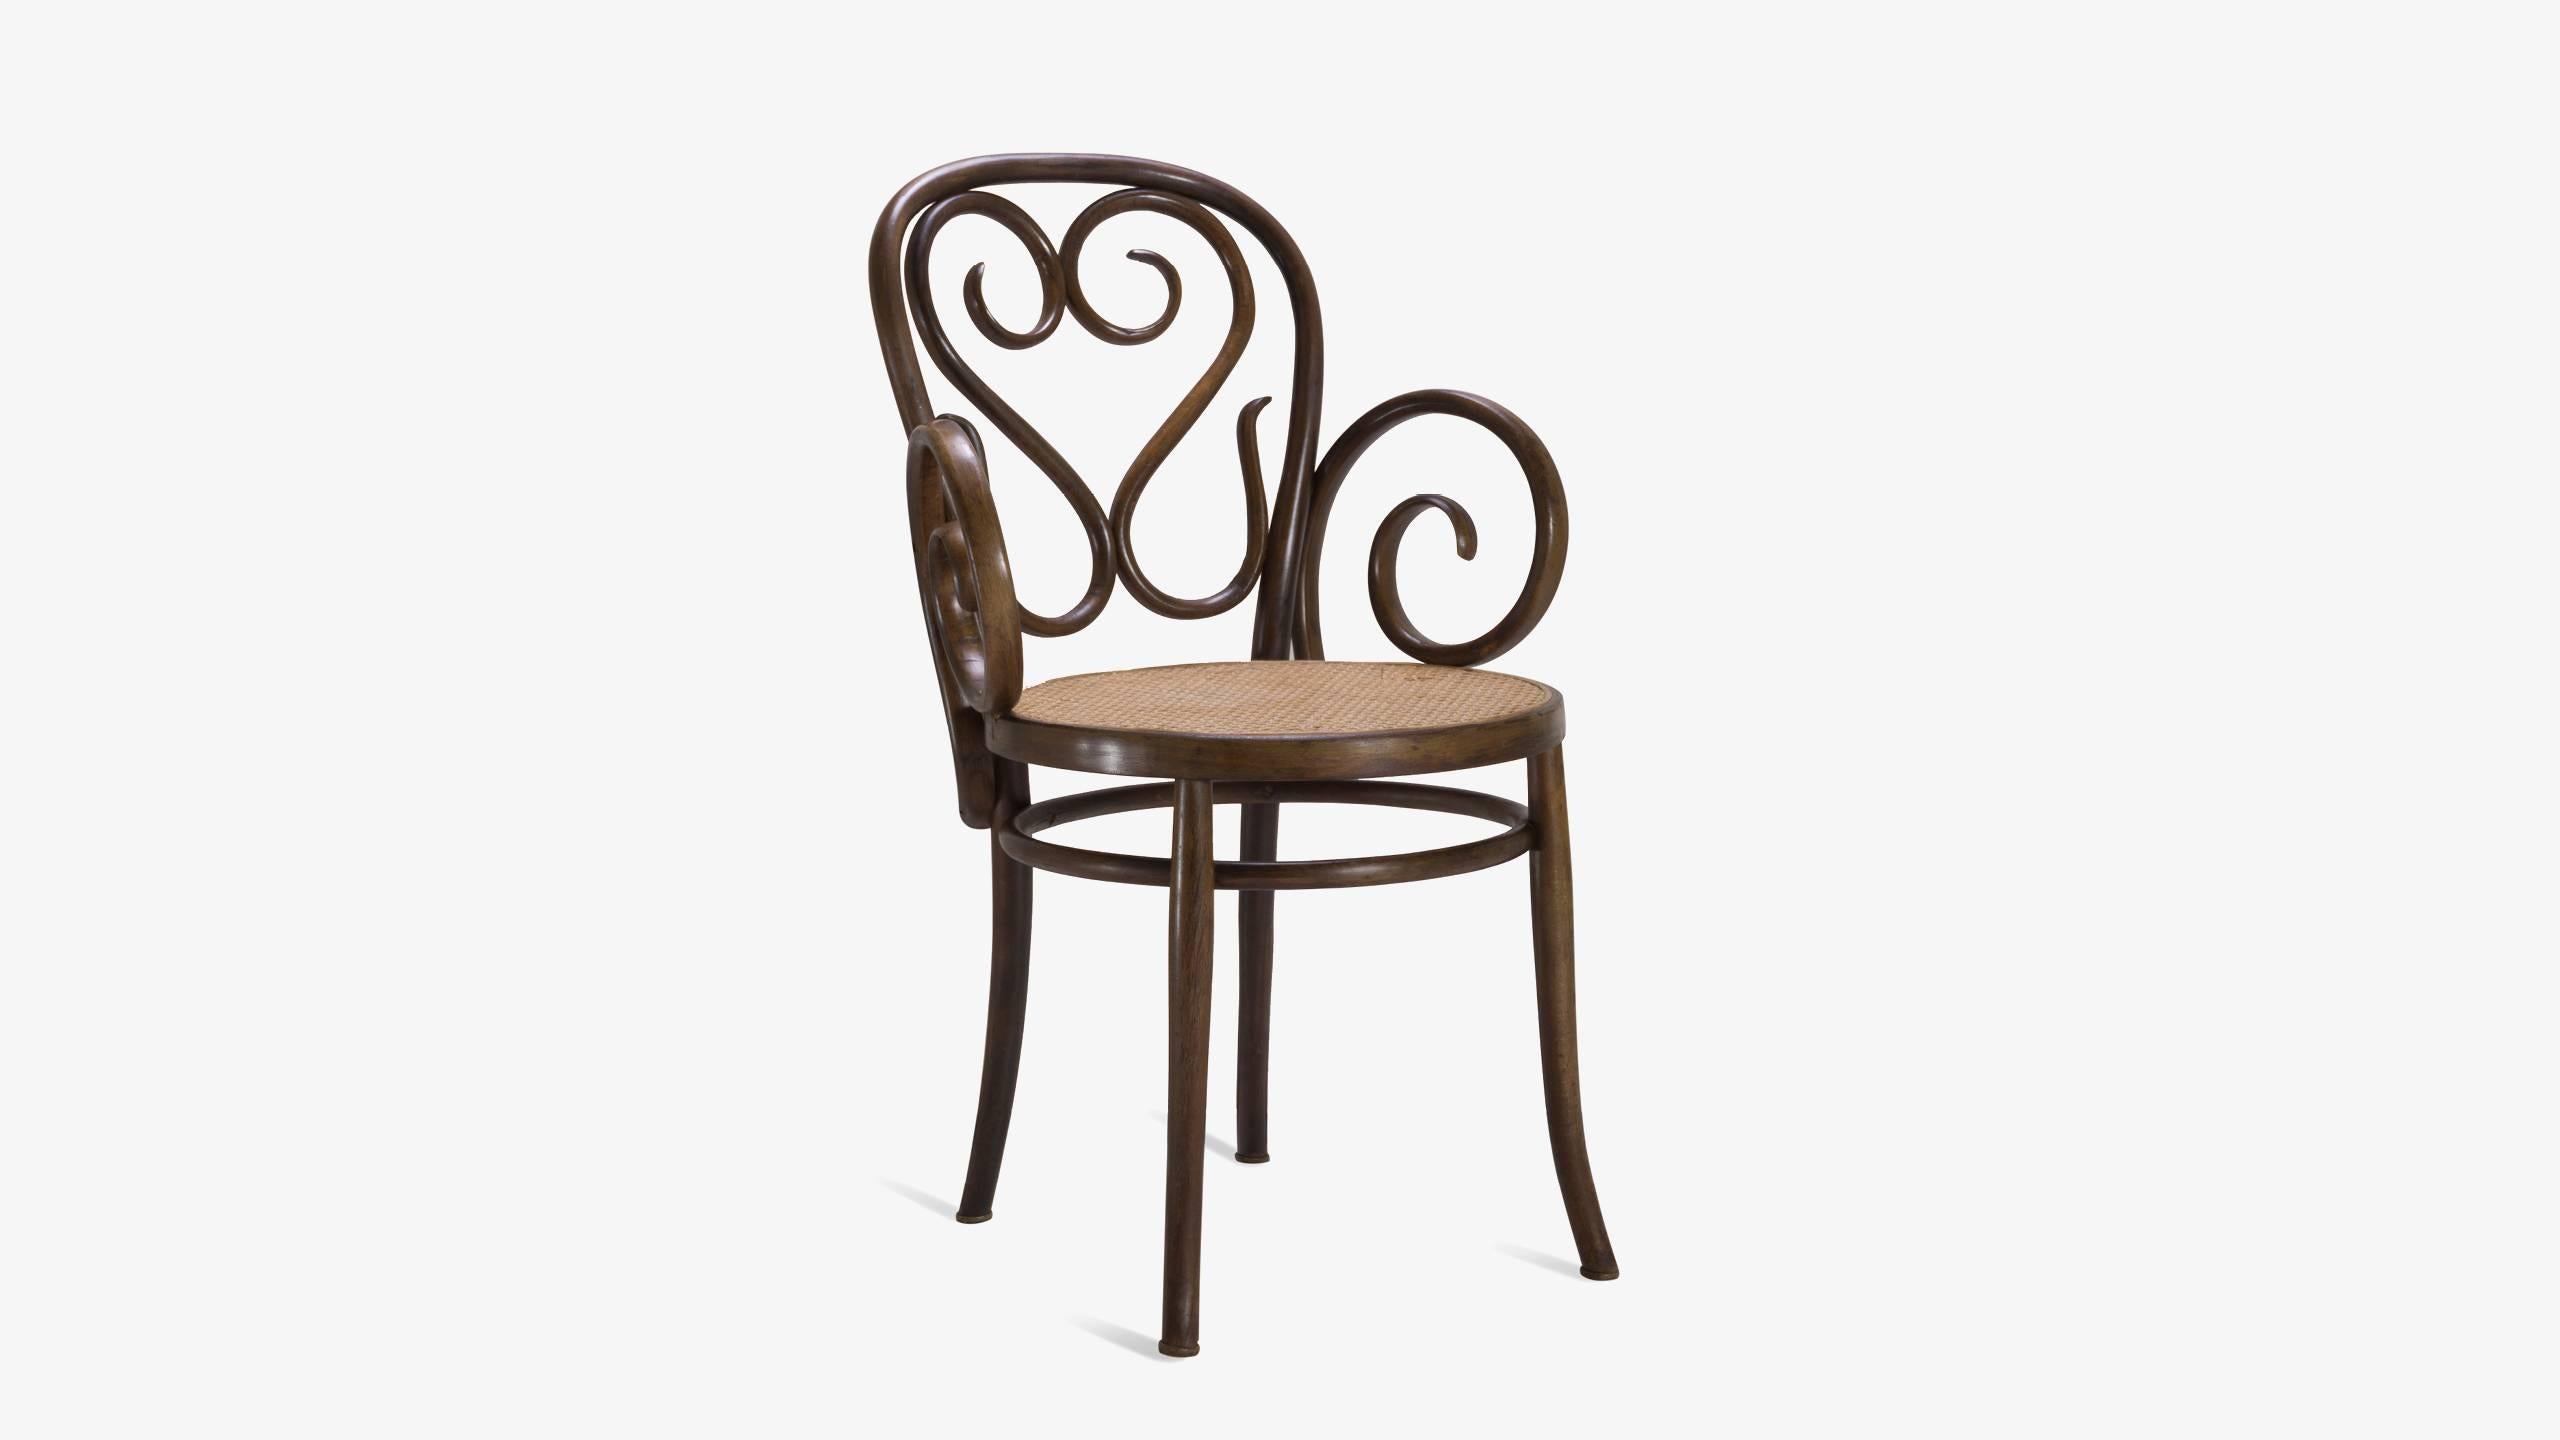 An exquisite example of fine Italian craftsmanship very much in the style of Thonet. These chairs feature intricate woodwork that is wonderfully visually seductive. Generous swooping arms are the staple of this particular design which frame a round